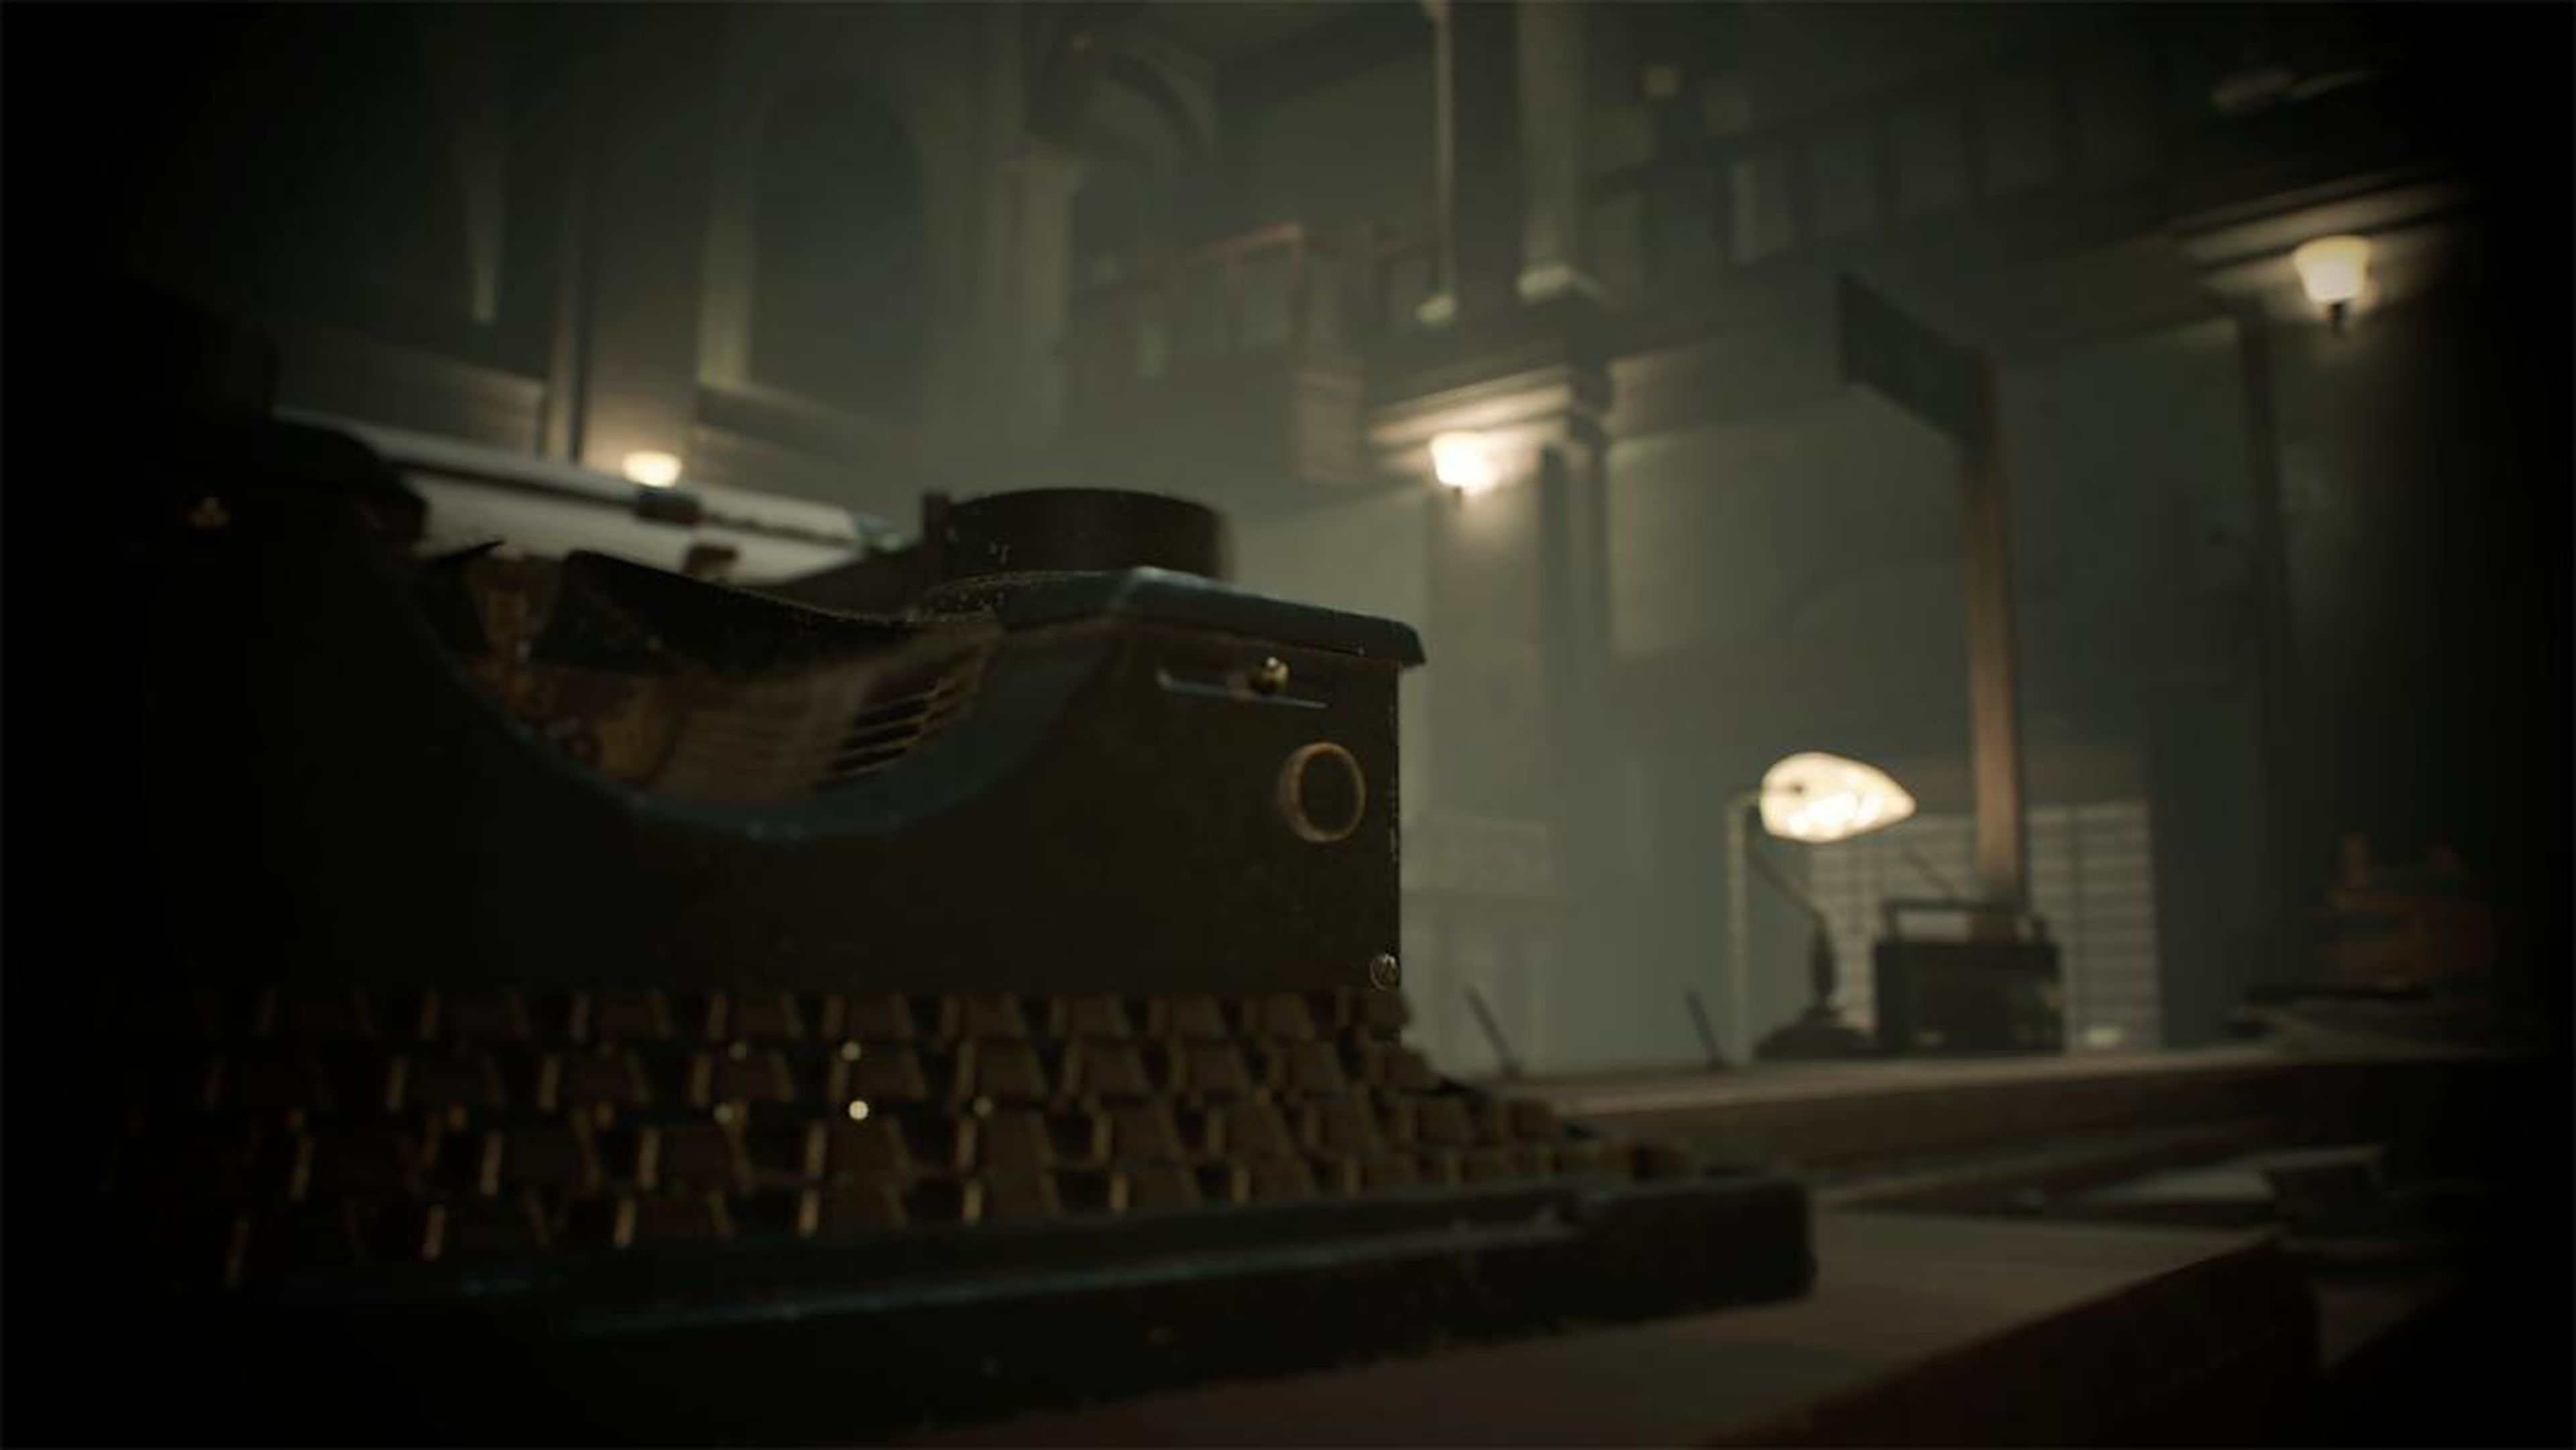 Just like so many other "Resident Evil" games, "Resident Evil 2" uses a typewriter as a means of saving your game.